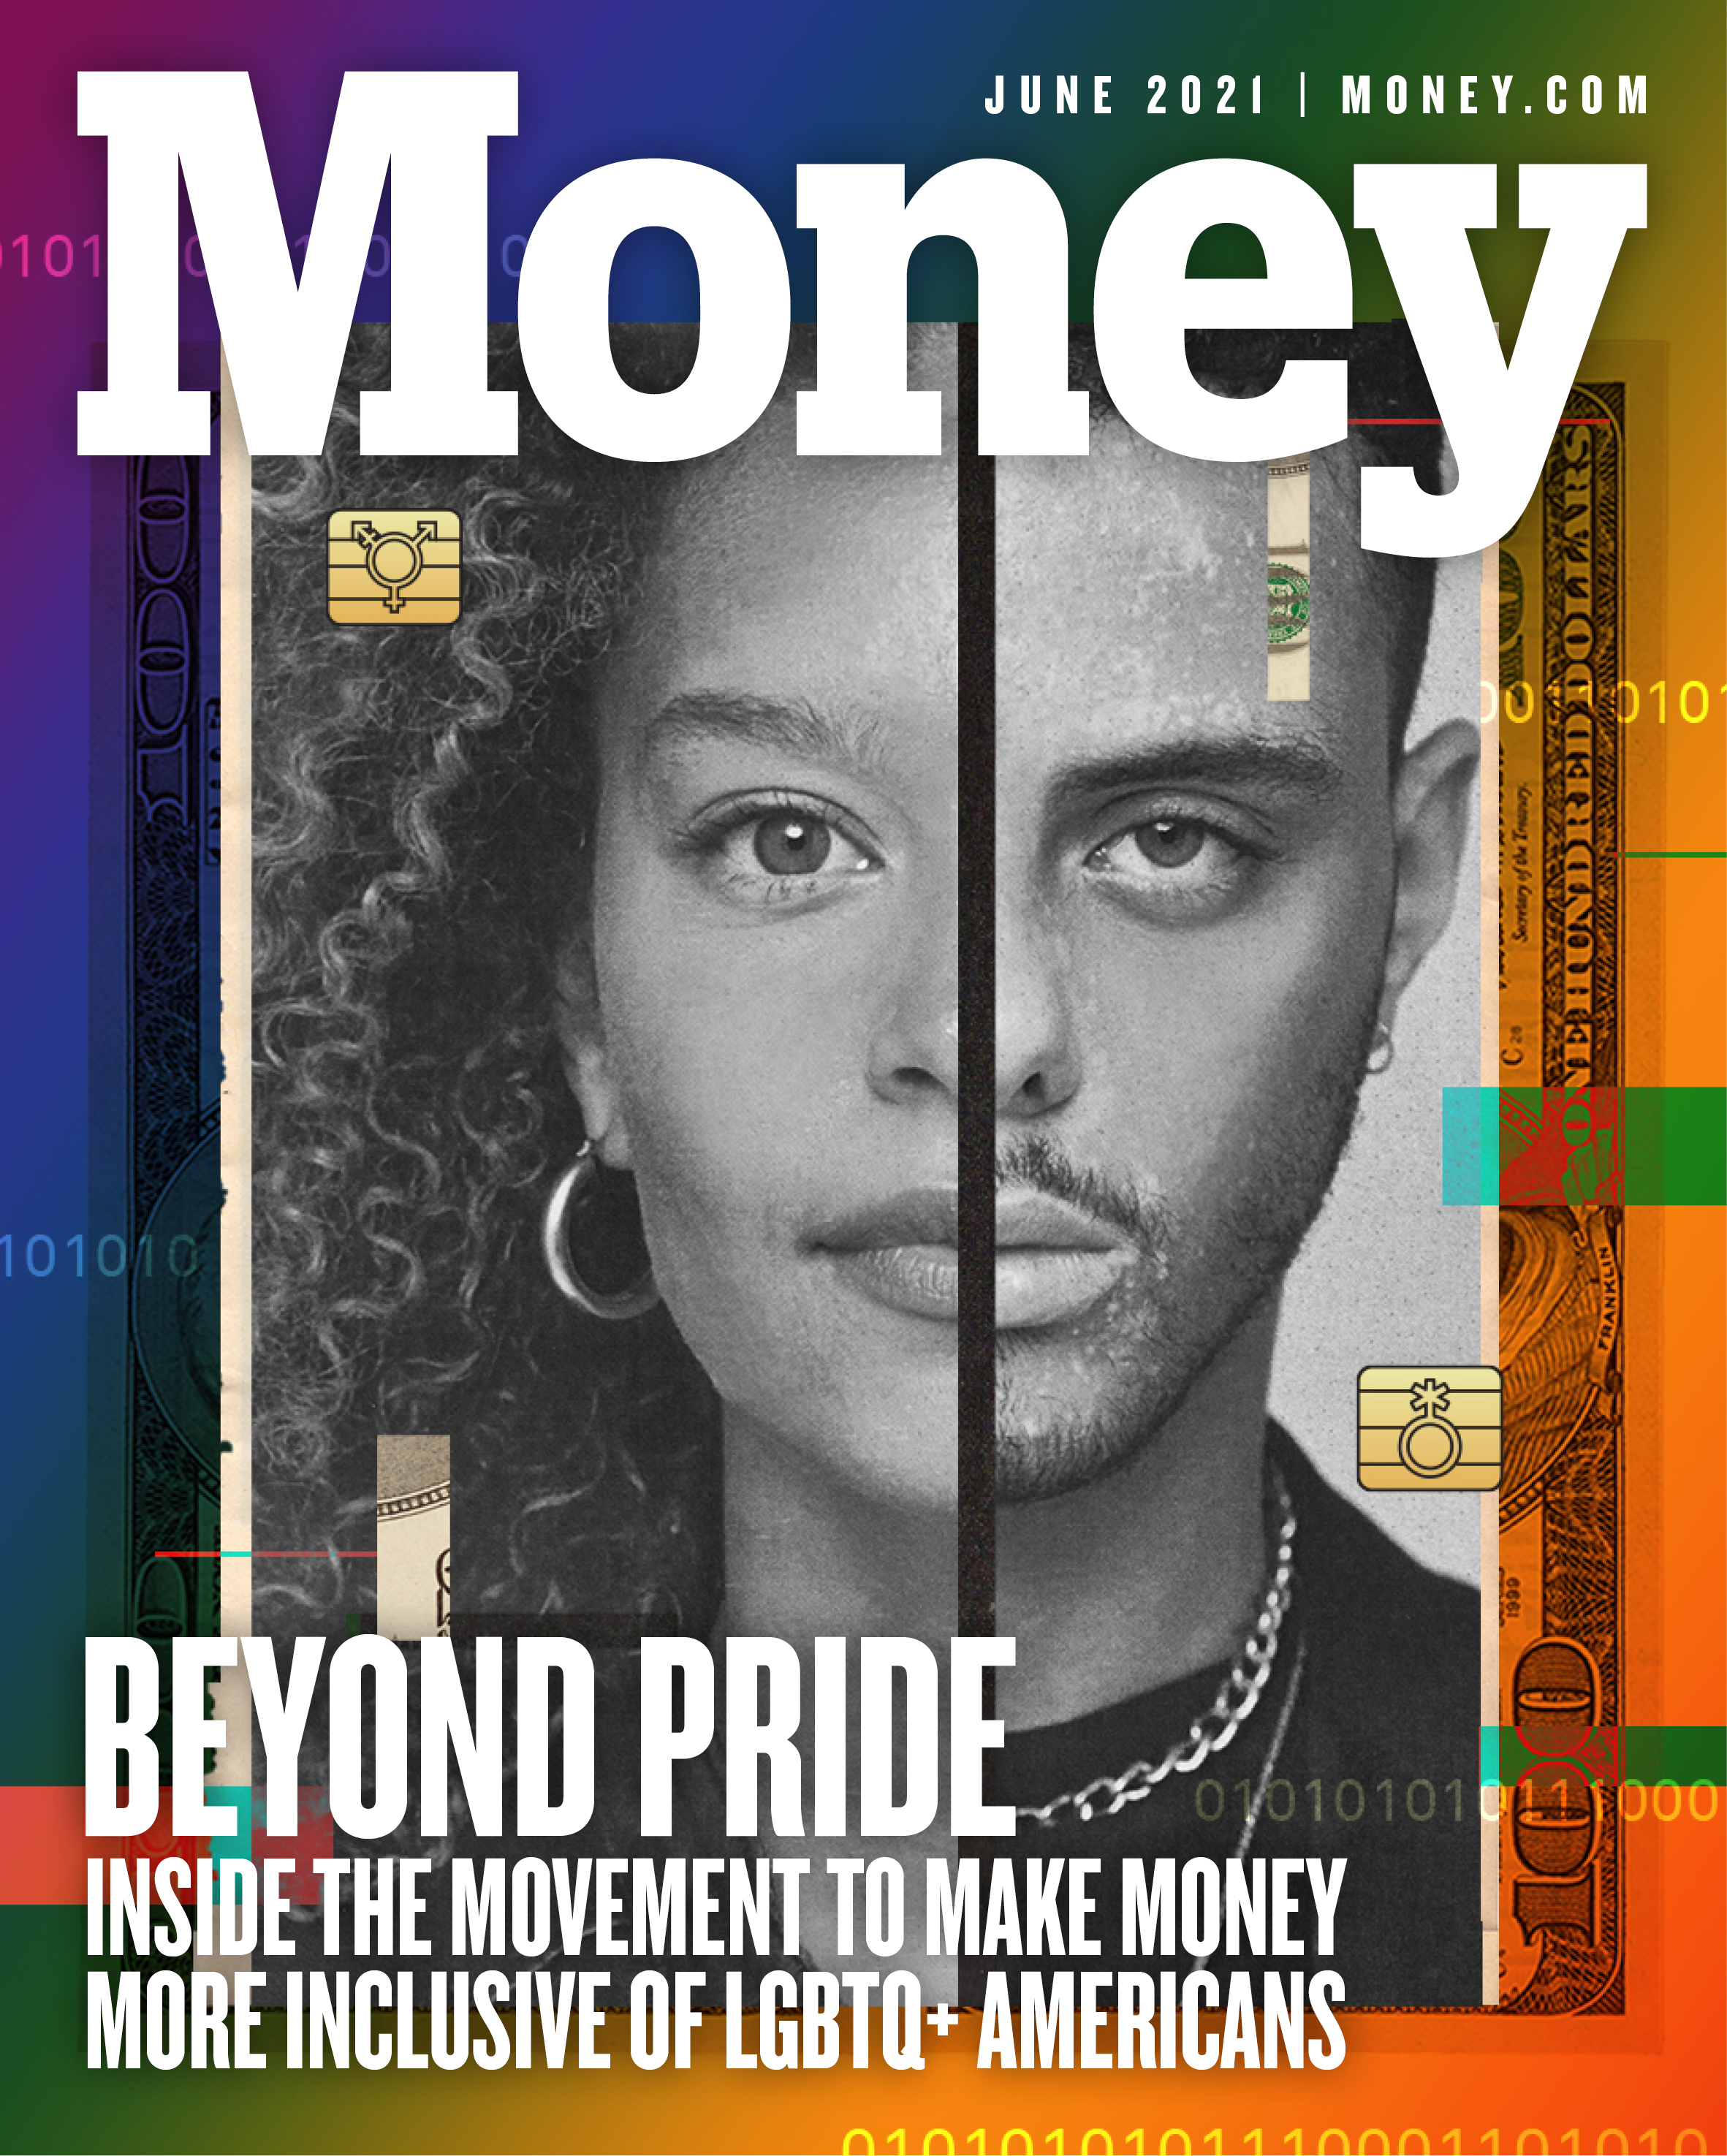 Cover with composite image made from halved male and female facial features, and hundred dollar bill on the rainbow backdrop.